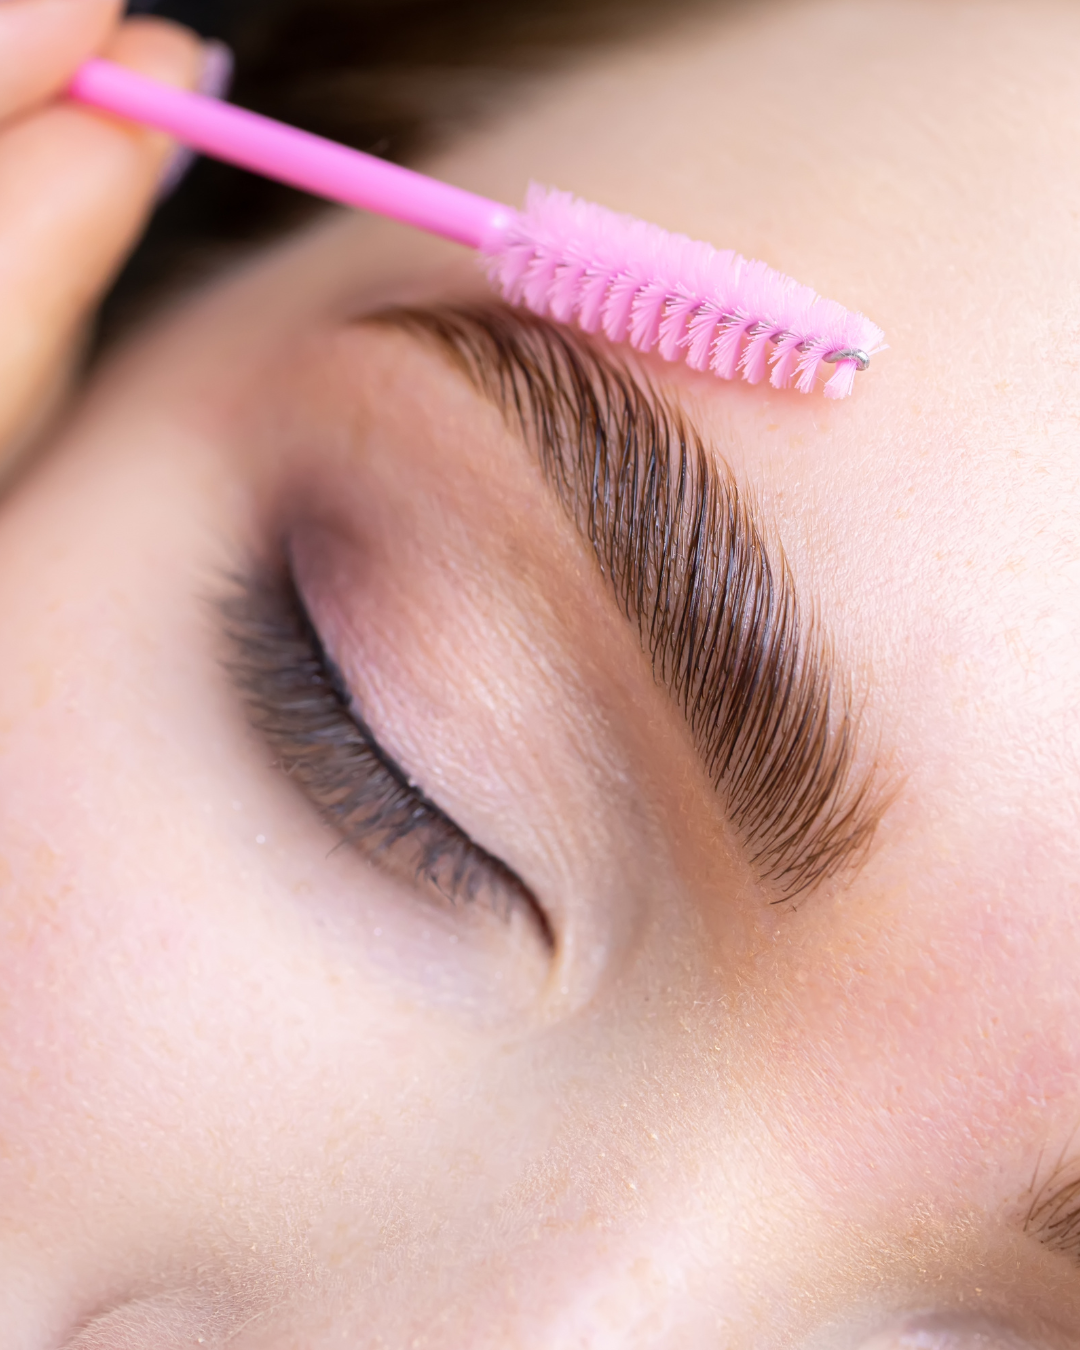 Top 5 DFW Spas for Eyebrow Threading: The Quest for the Perfect Brow